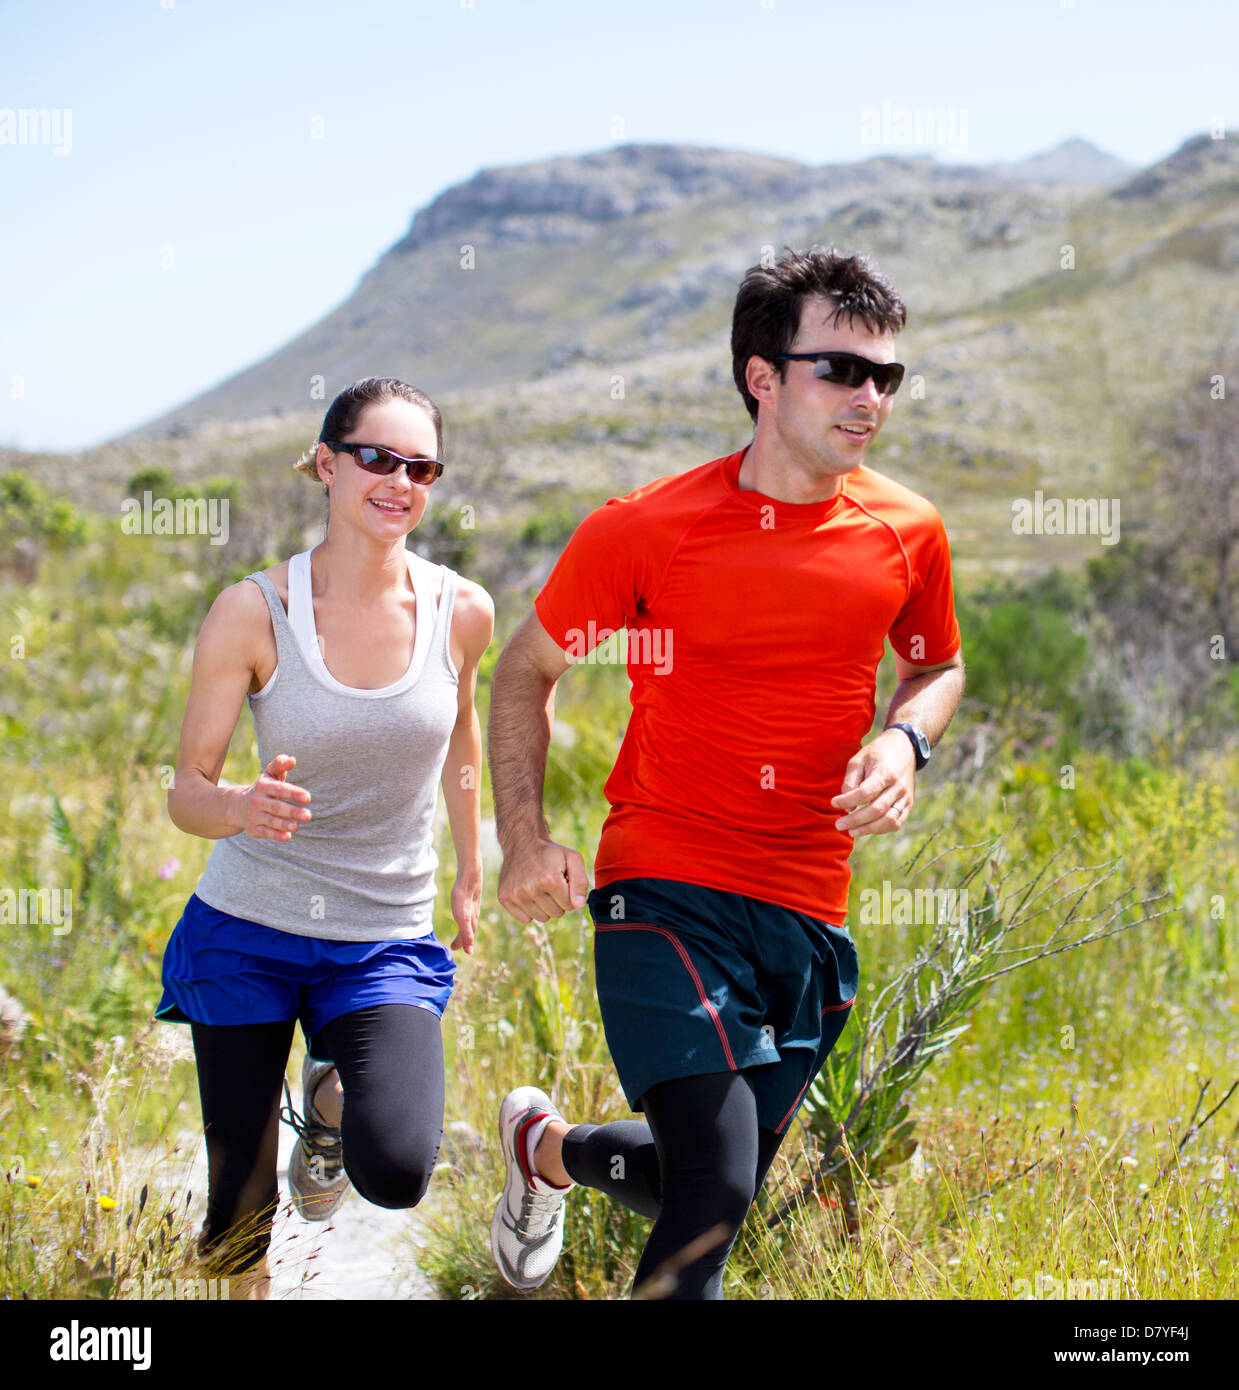 Couple running on dirt path Banque D'Images